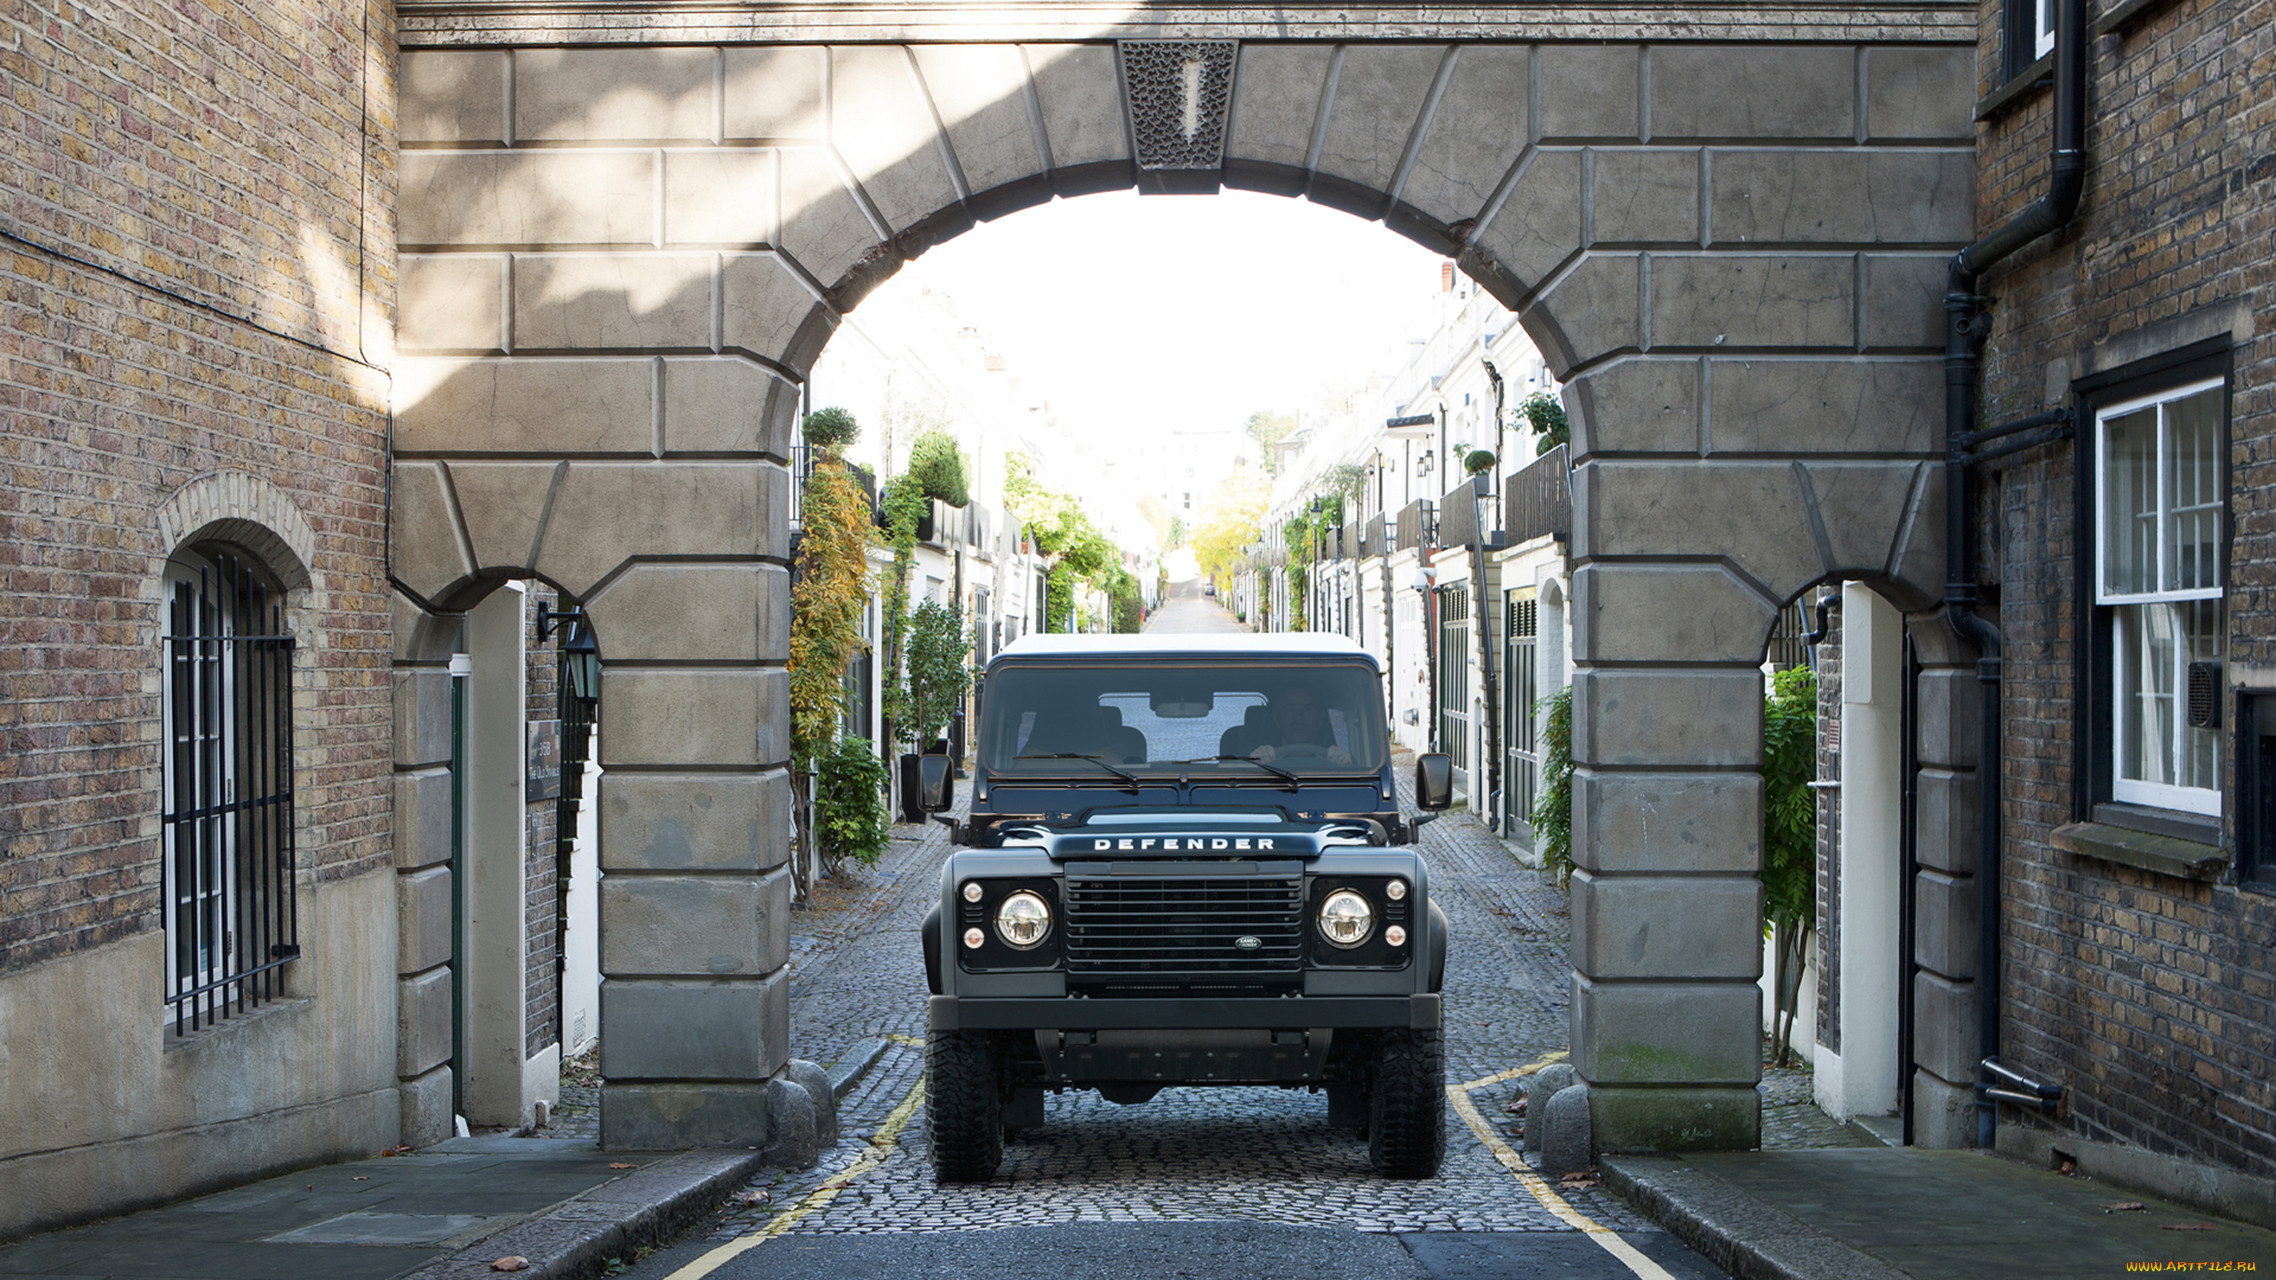 land-rover defender autobiography edition 2015, , land-rover, 2015, edition, autobiography, defender